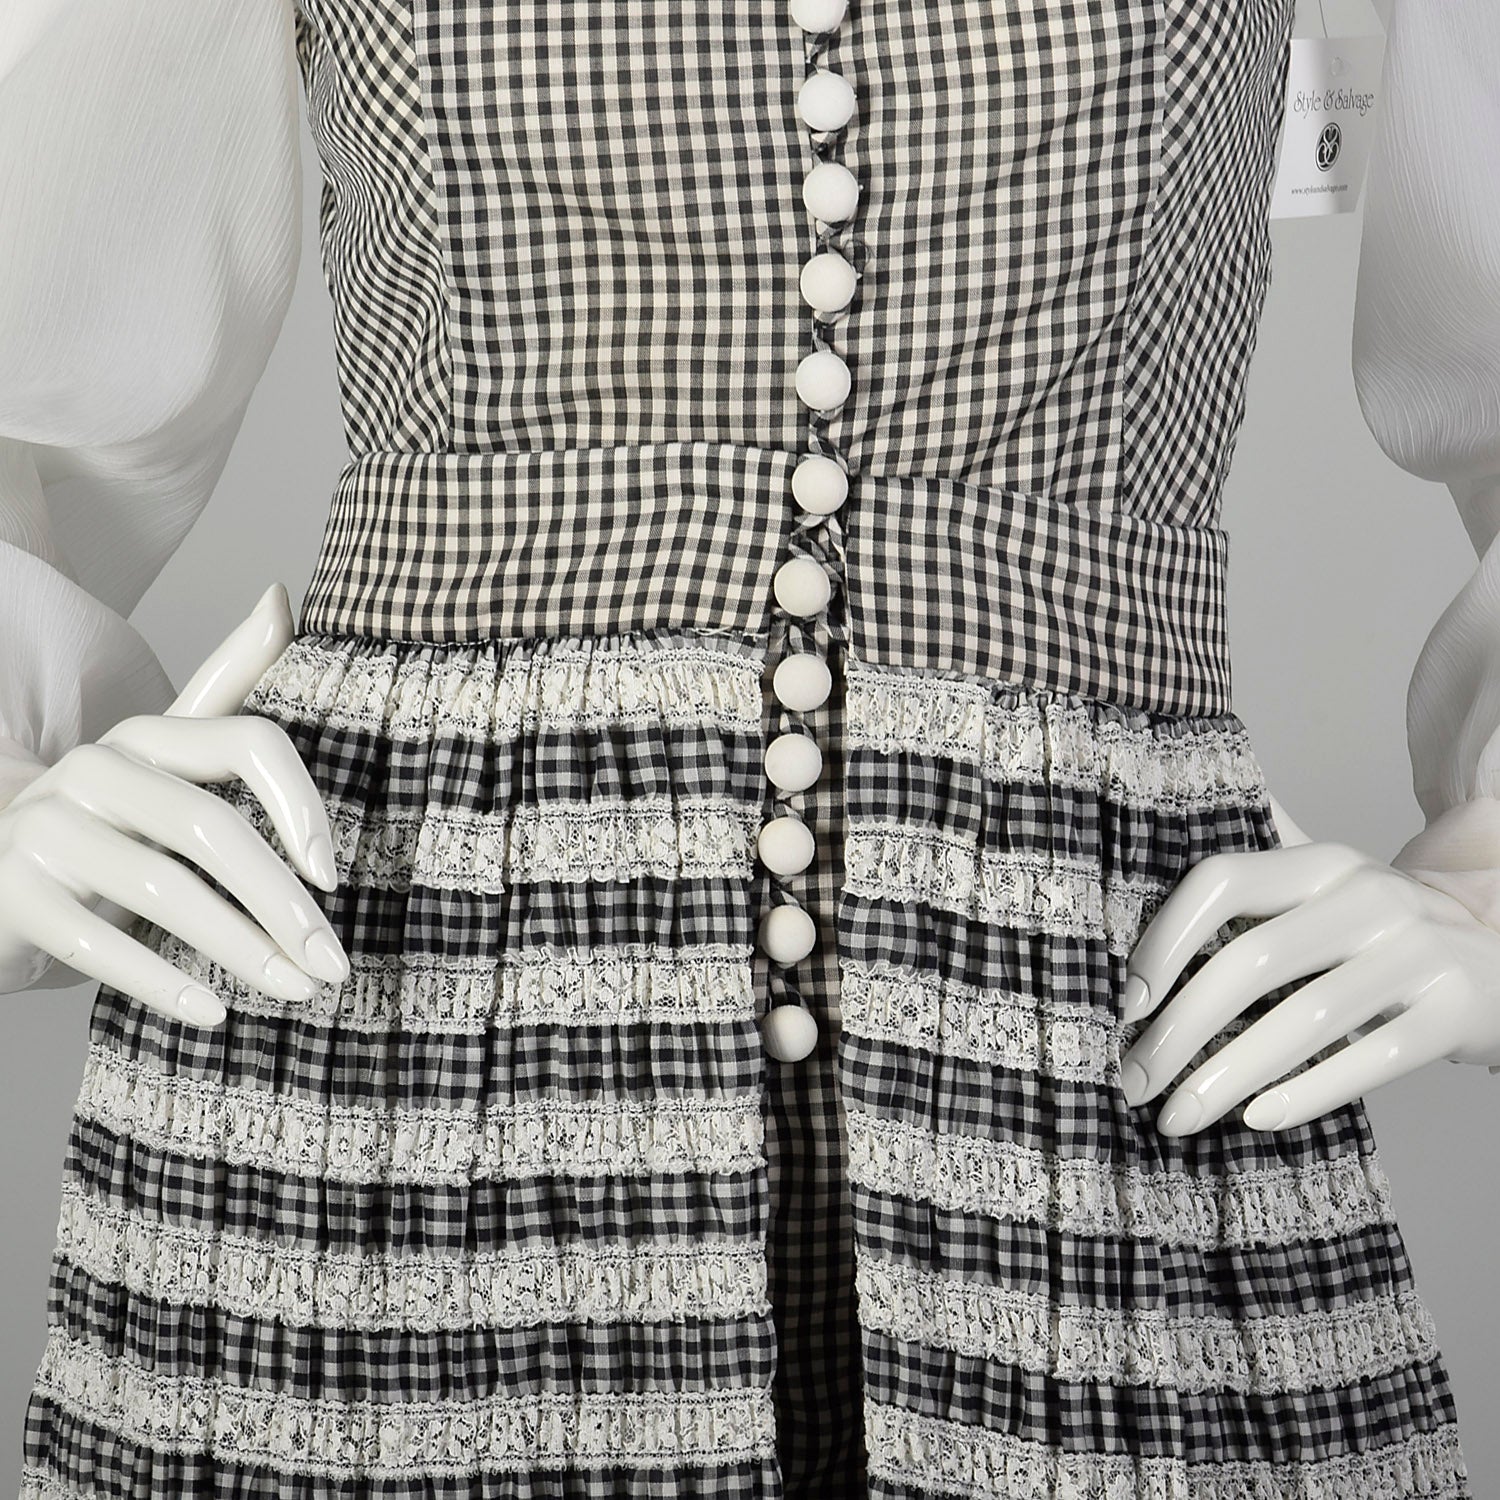 Small 1970s Romper Black and White Checkered Lace Overskirt Sheer Longsleeves